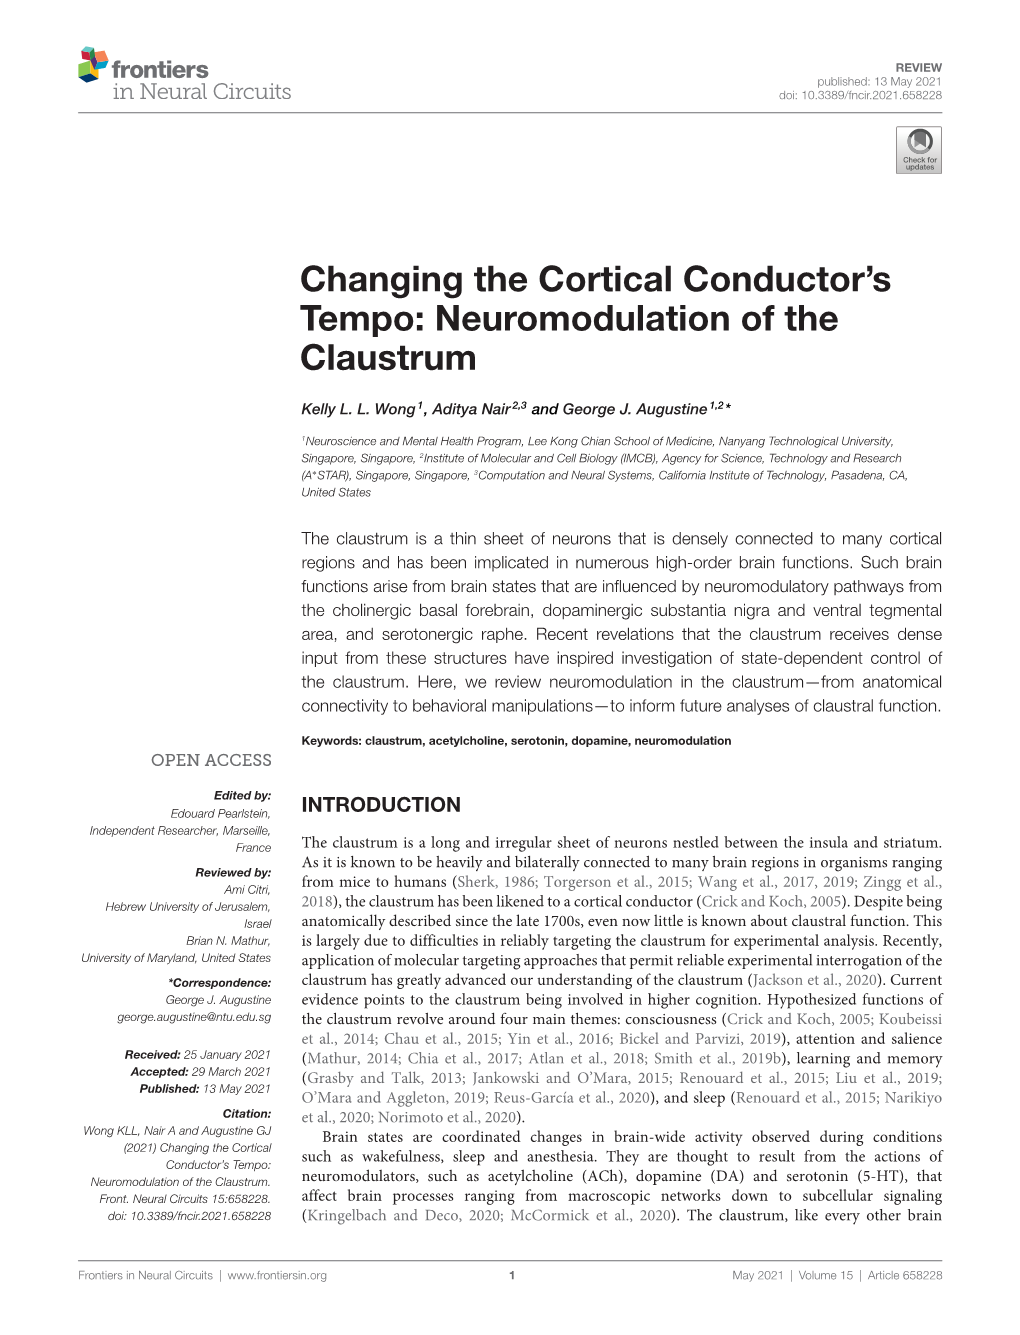 Changing the Cortical Conductor's Tempo: Neuromodulation of the Claustrum